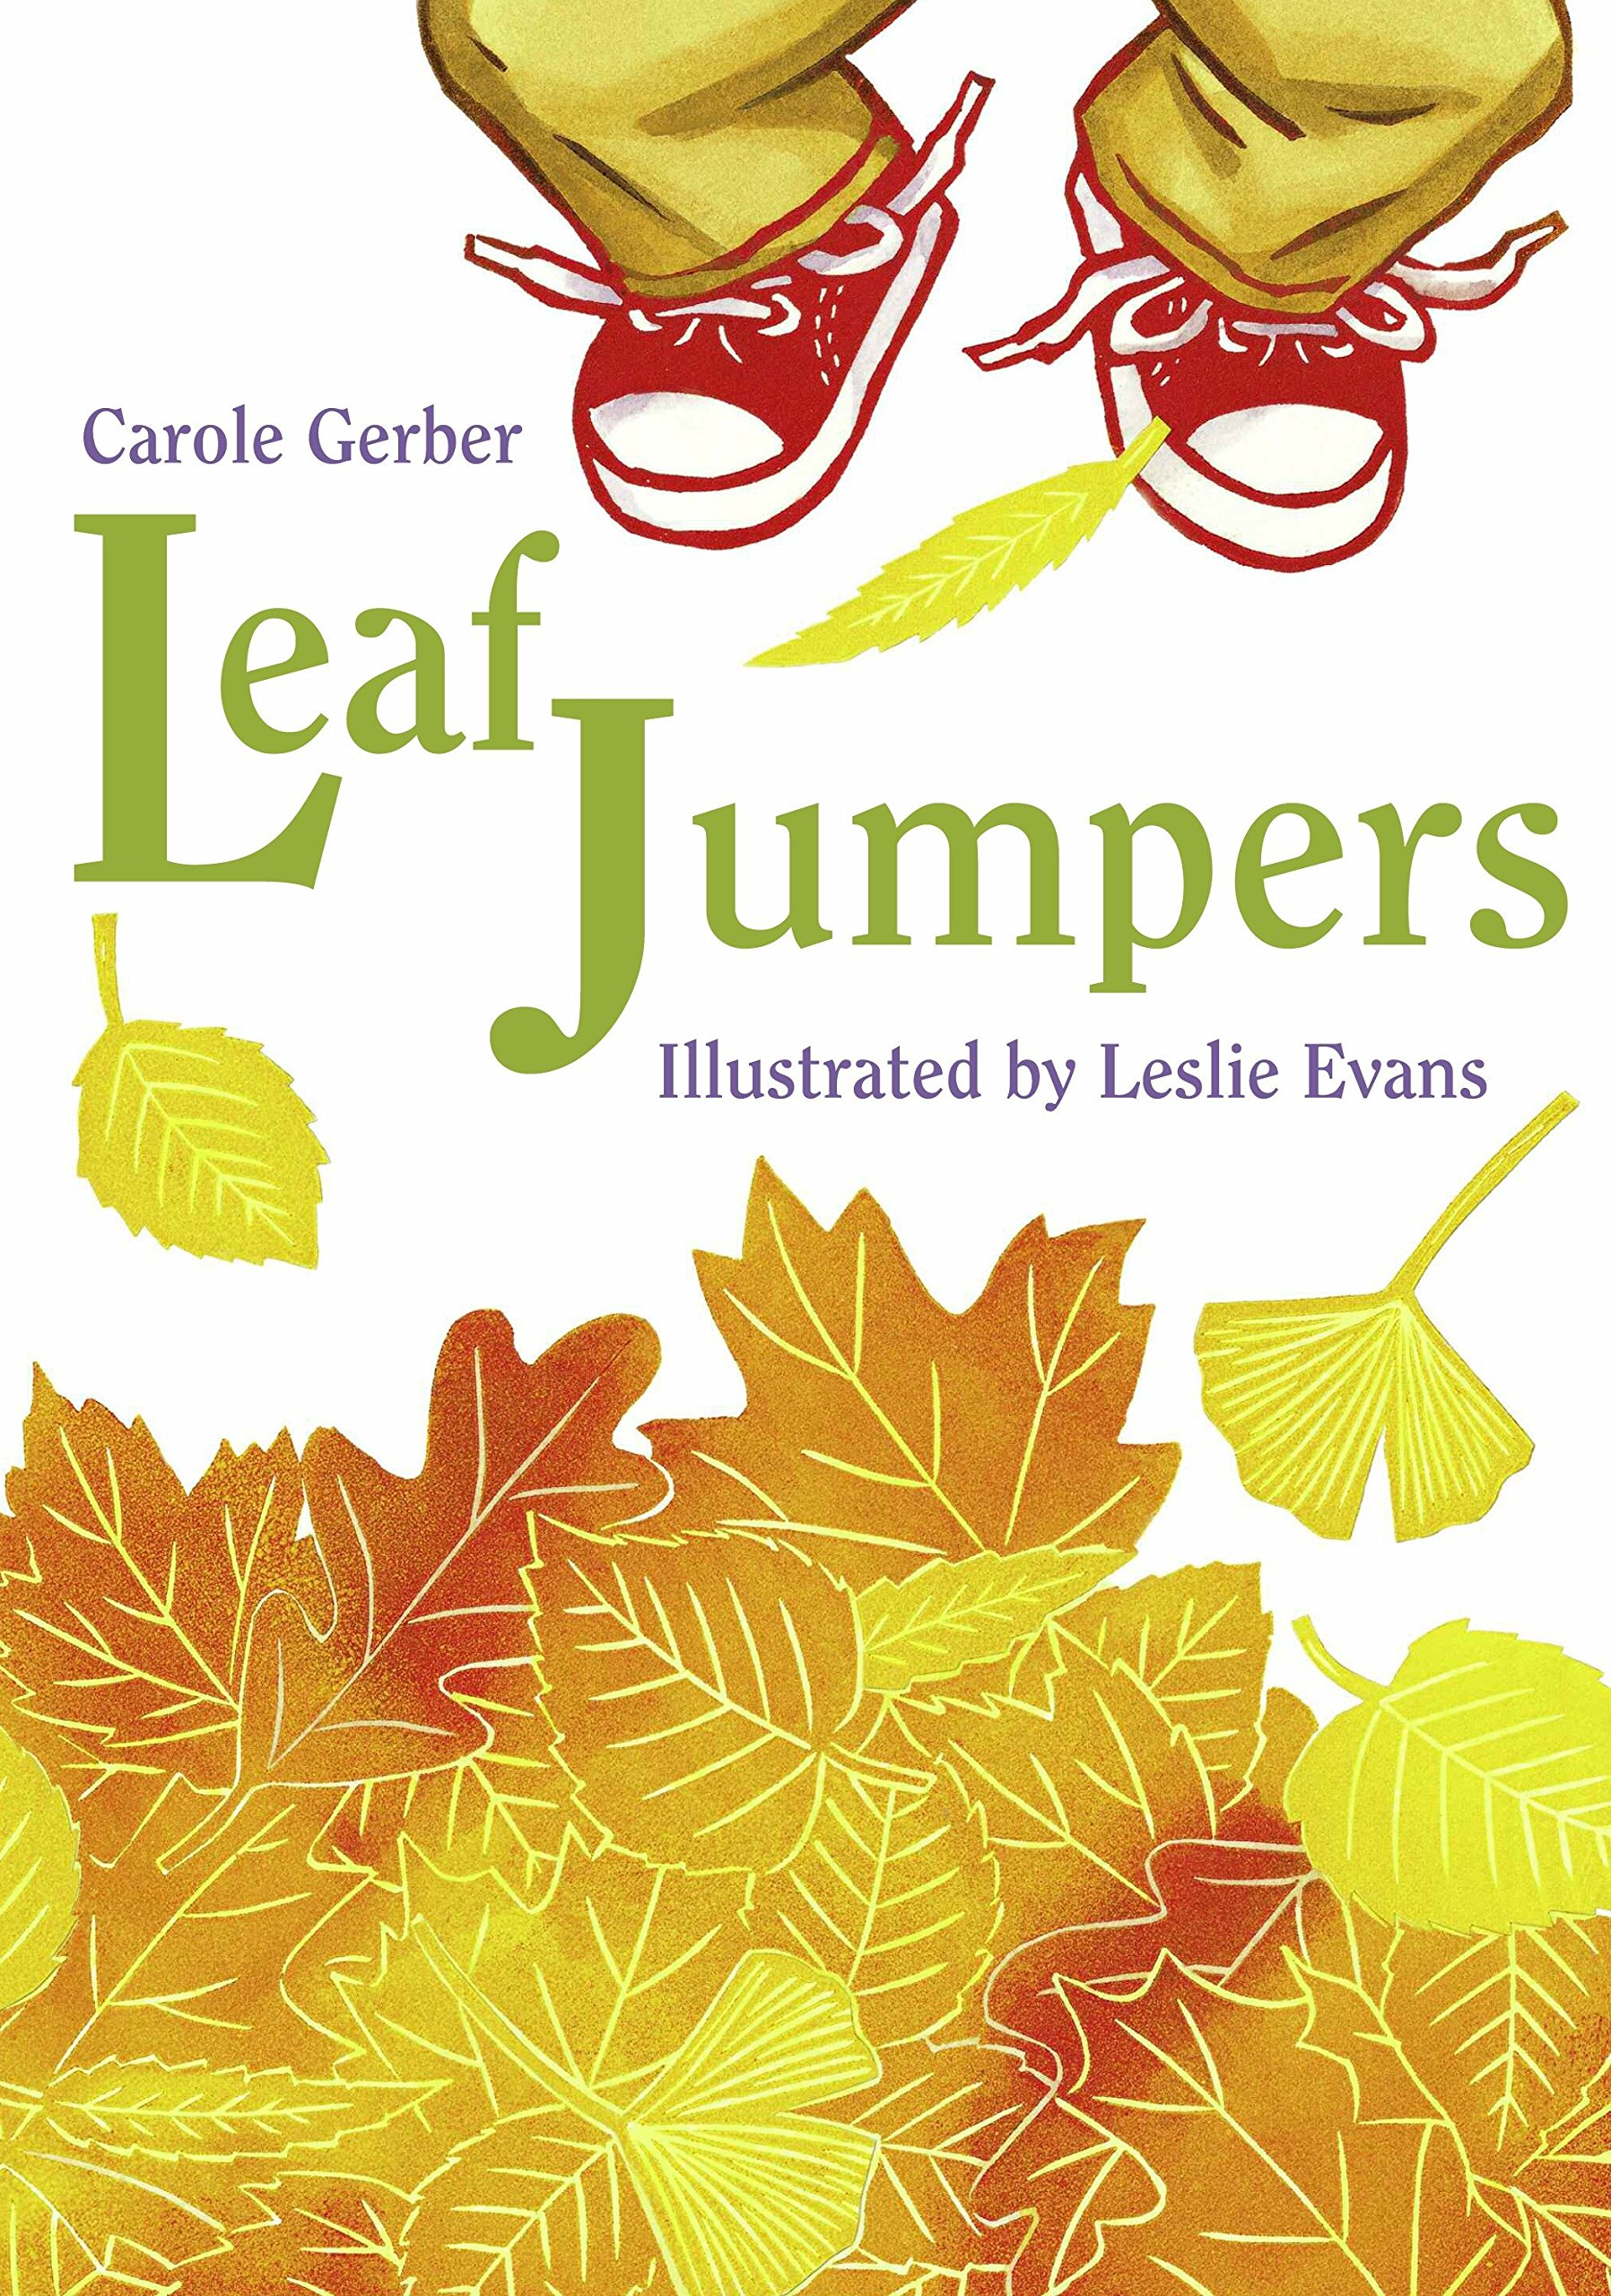 speech and language teaching concepts for Leaf Jumpers in speech therapy​ ​